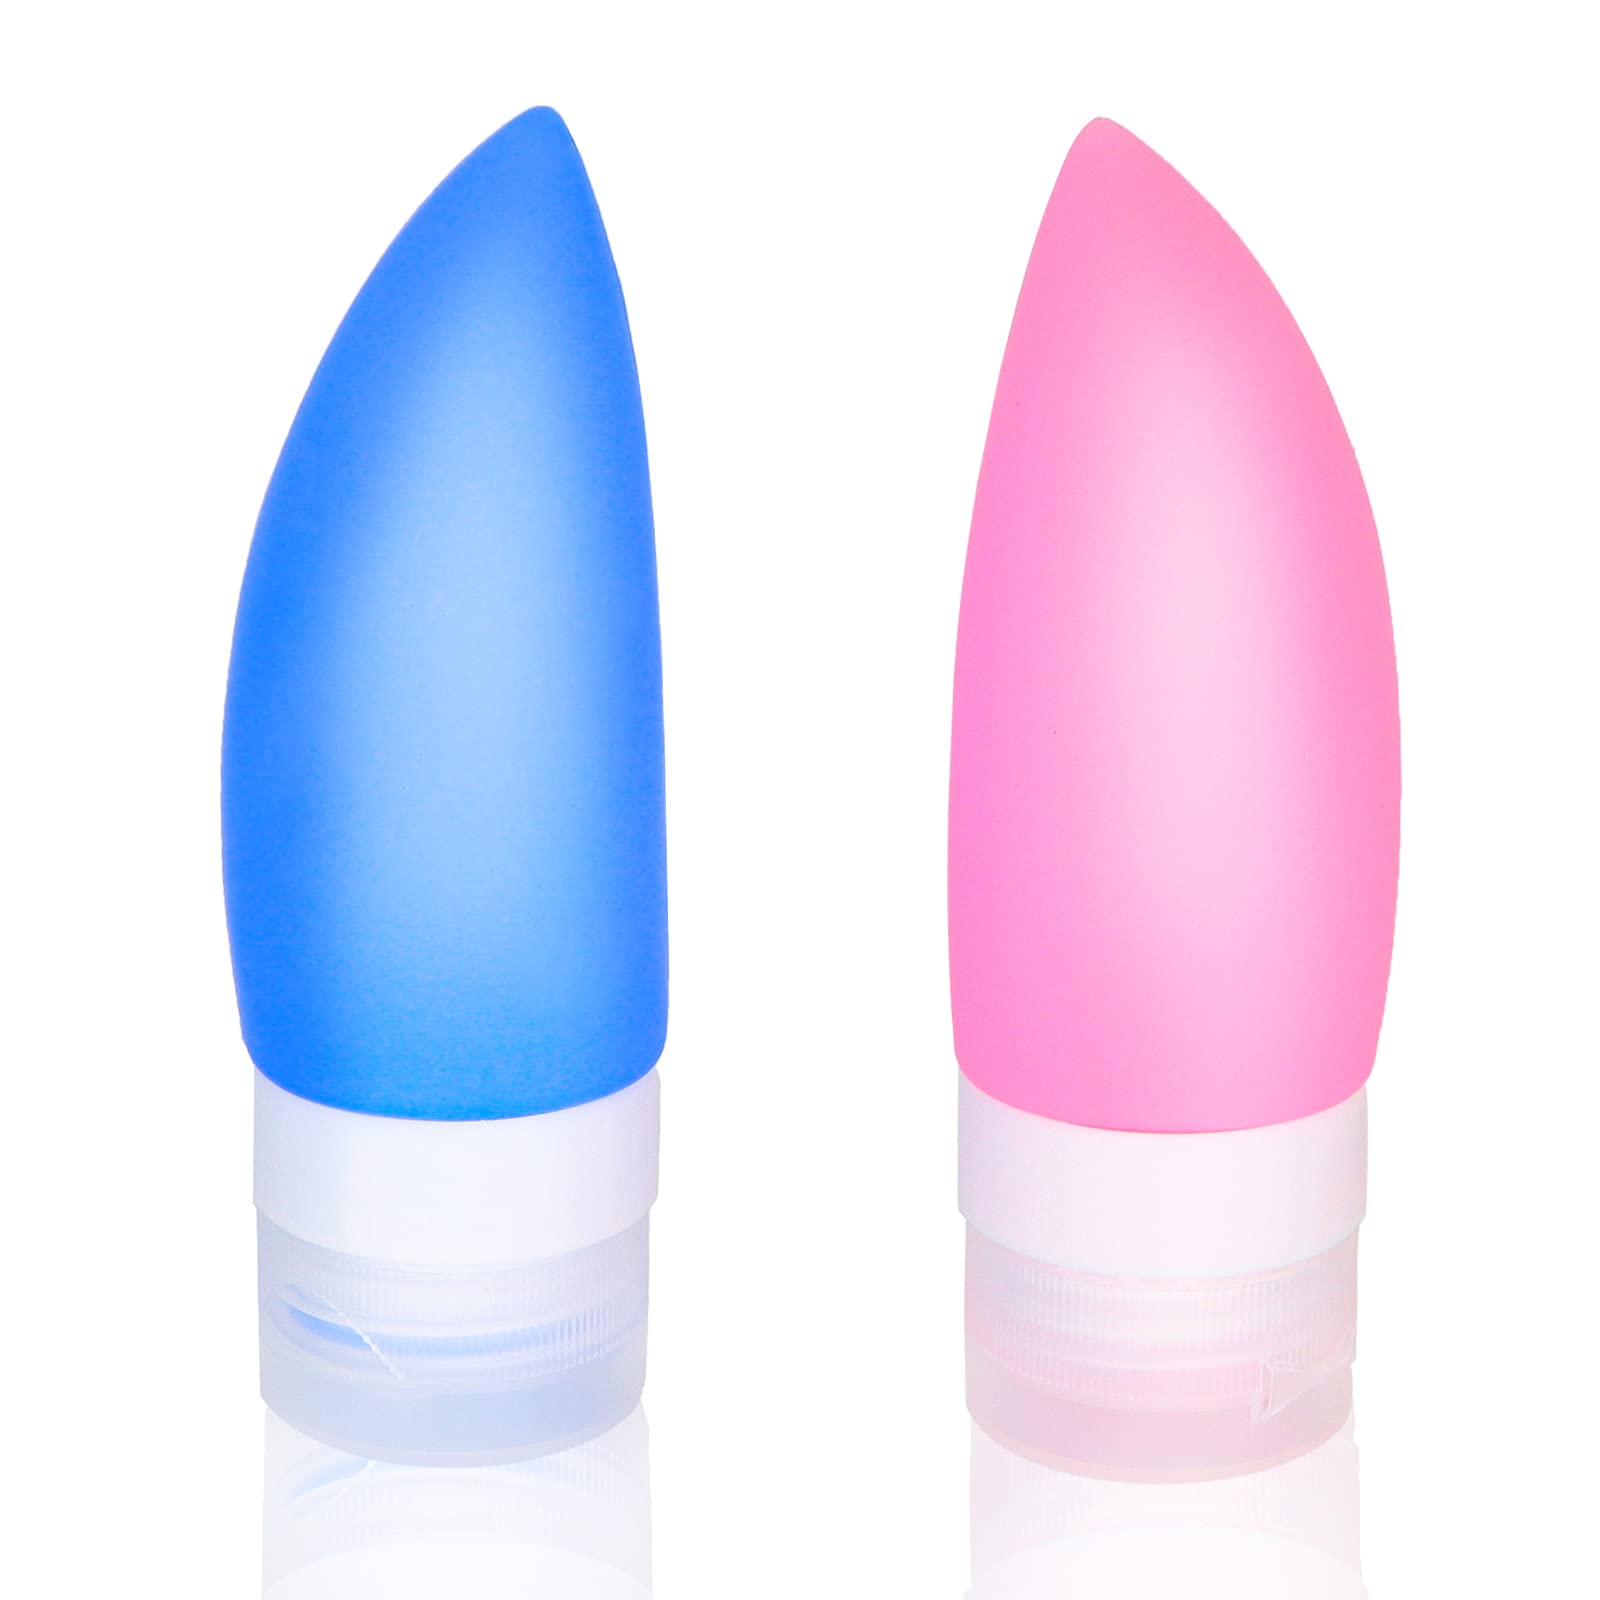 AFLOWER Silicone Travel Bottles, 2 pack Leak Proof Refillable Squeezable Containers Set, 90 ml Silicone Tubes Travel Size Toiletries Containers Portable Travel Bottles, Blue,pink, 12X4.5CM